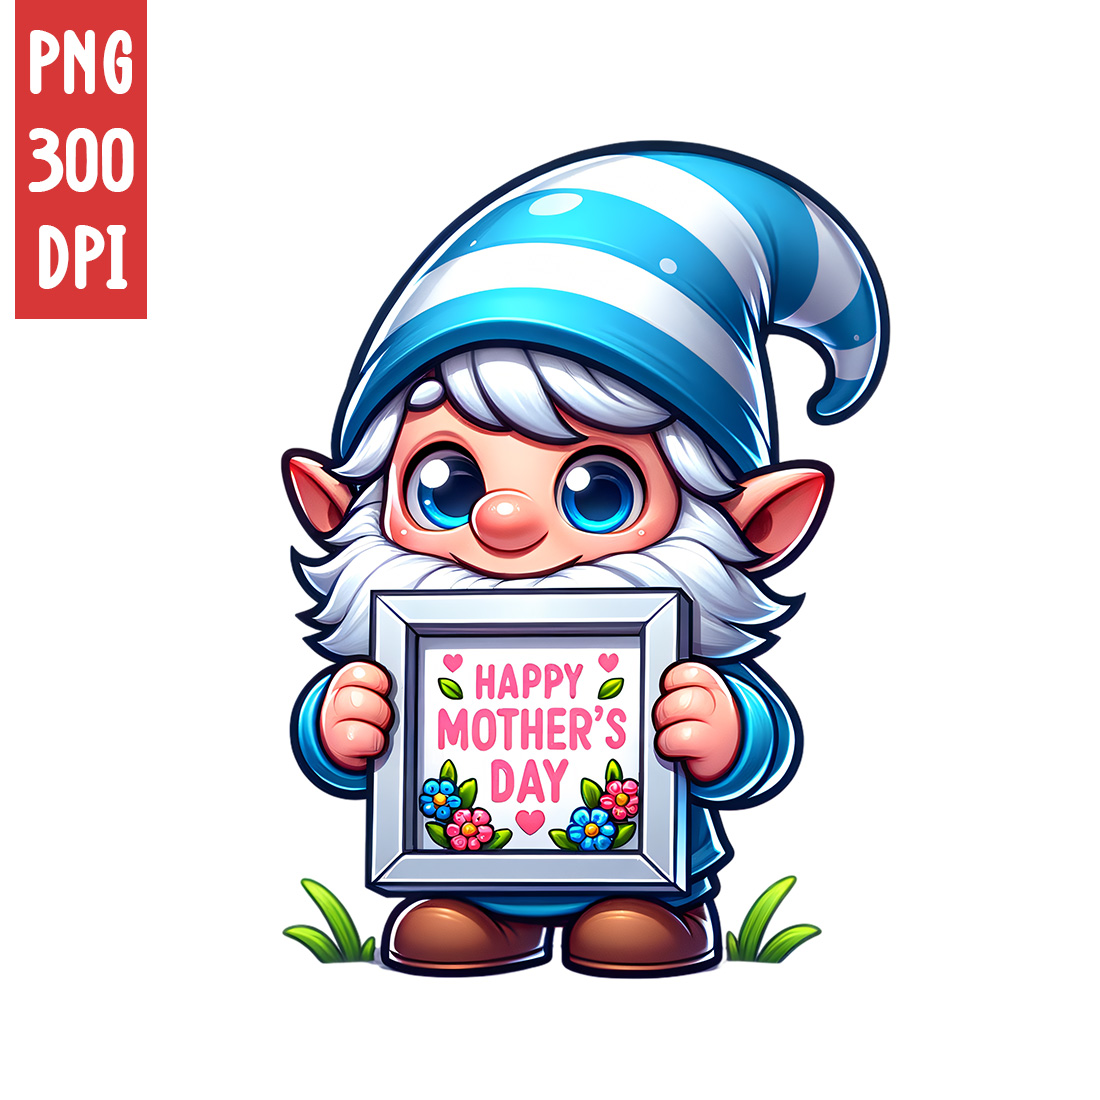 Mother's Day Clipart | Cute Gnome with frame clipart | PNG preview image.